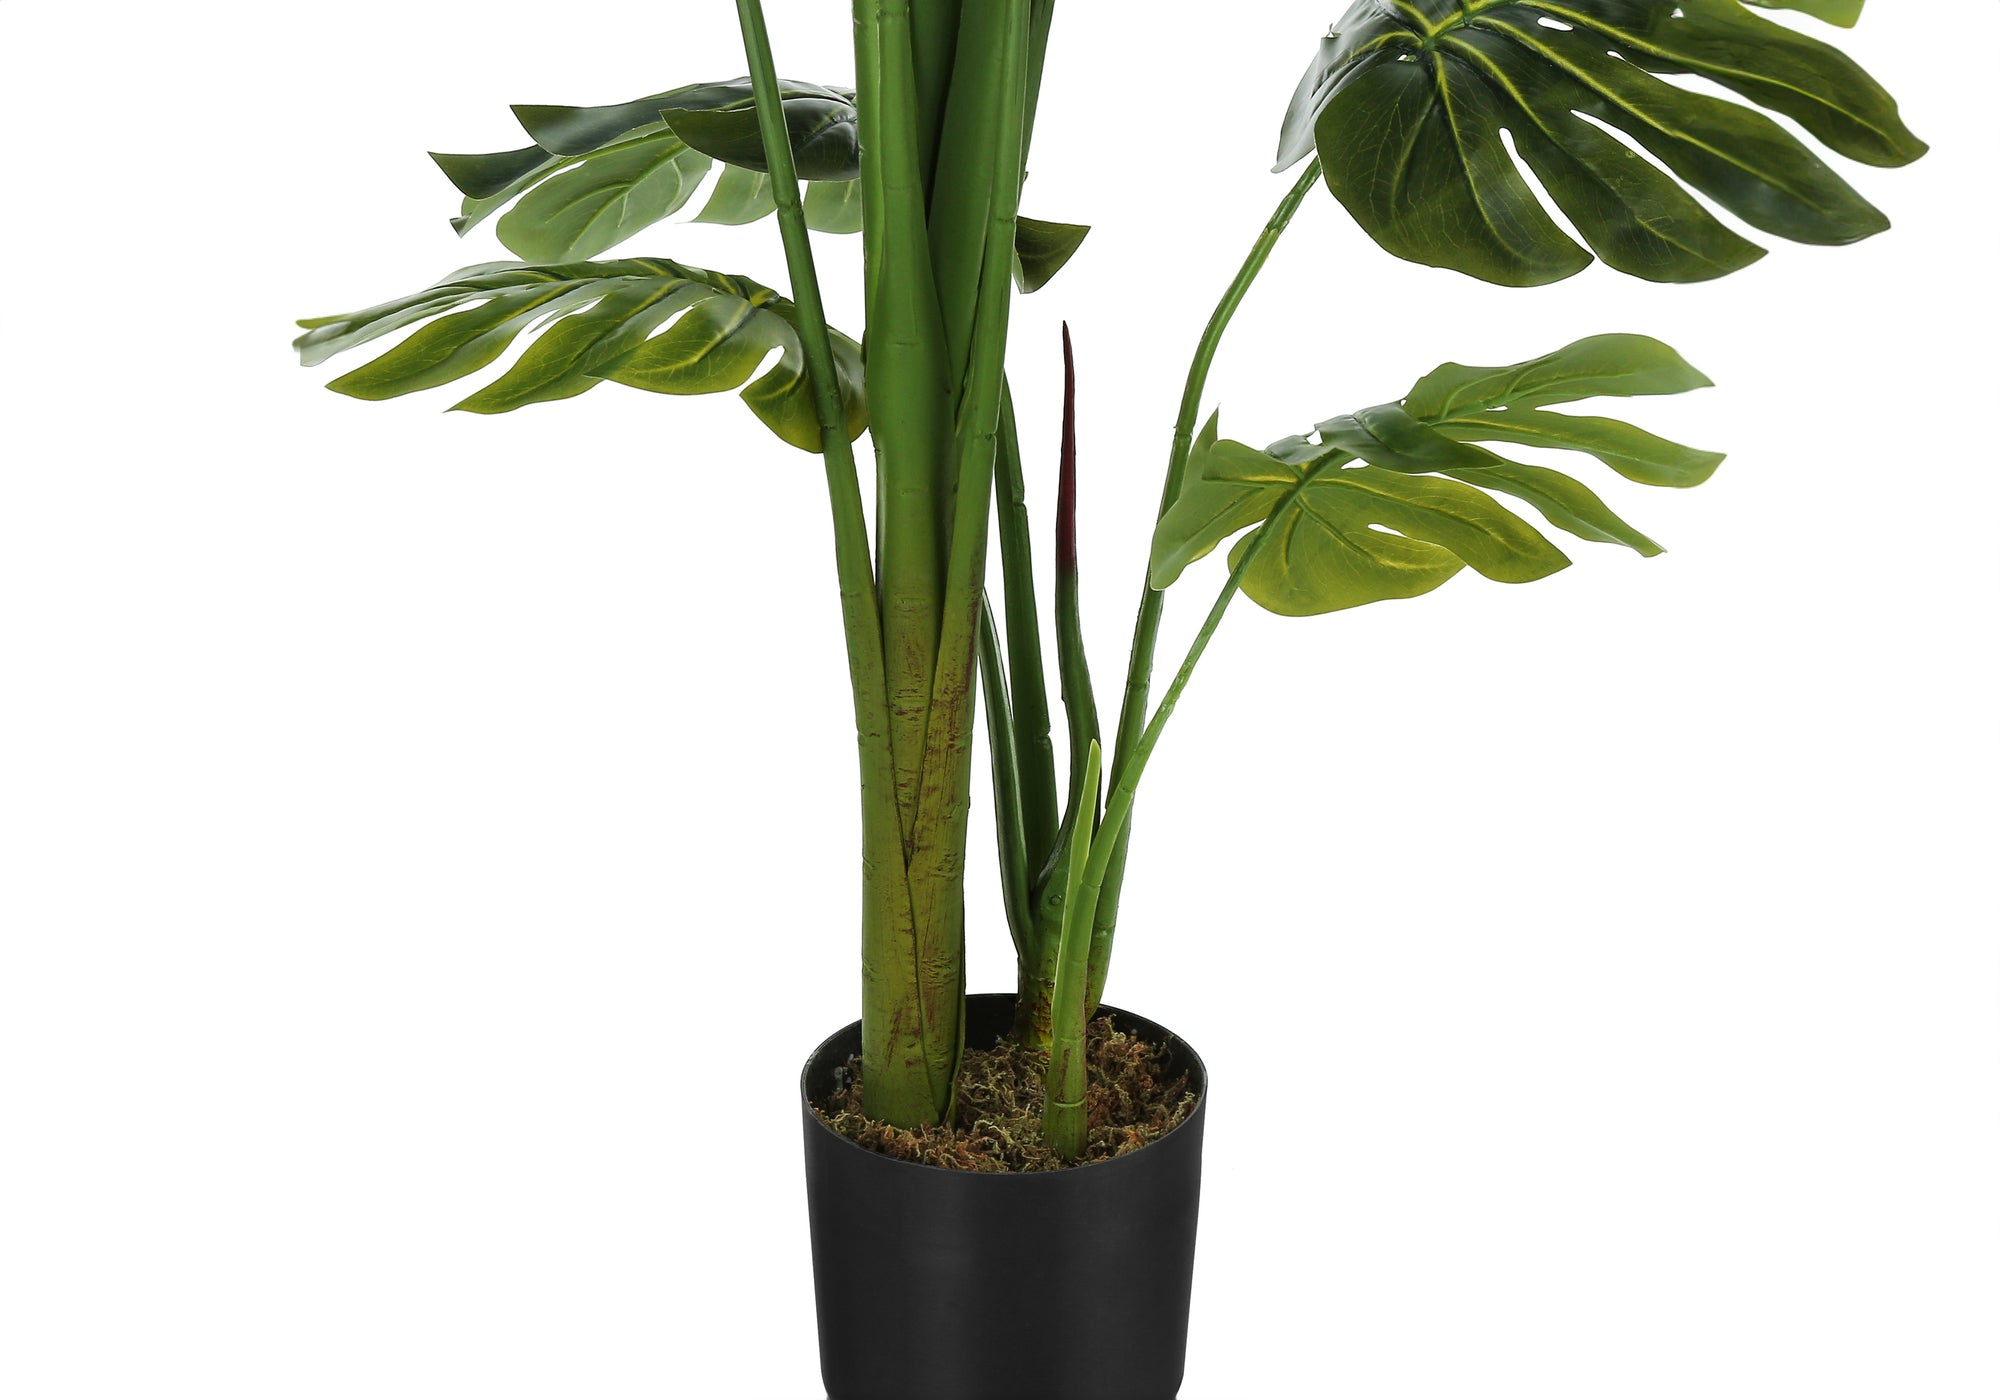 ARTIFICIAL PLANT - 55"H / INDOOR MONSTERA IN A 6" POT